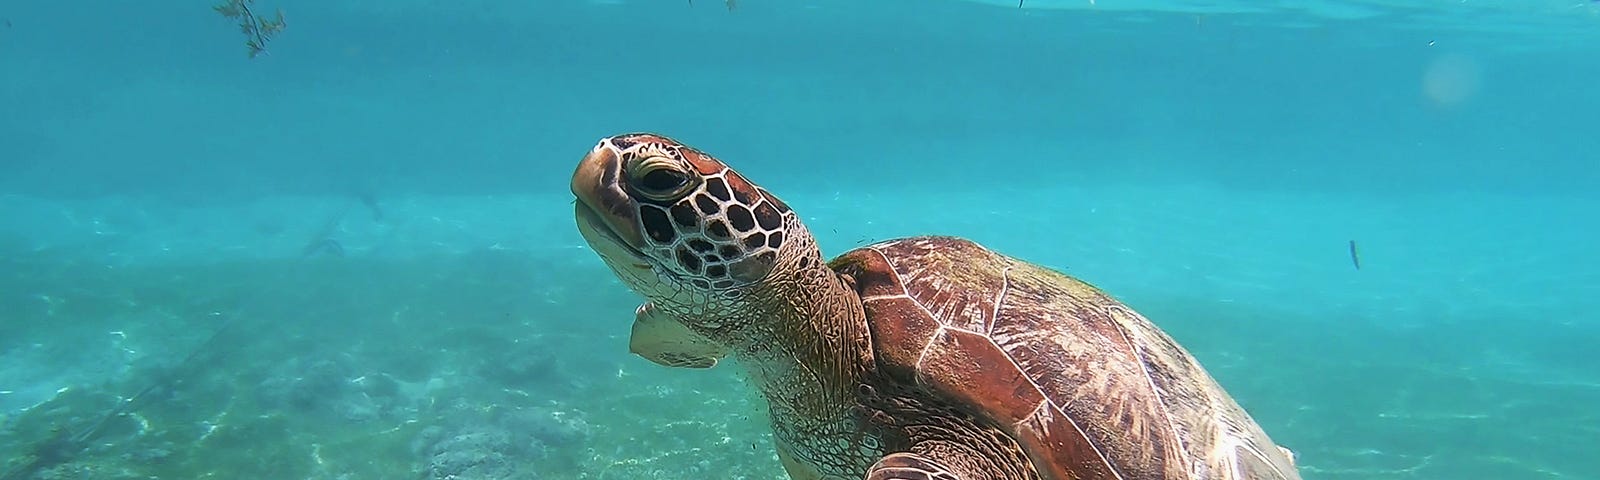 Sea turtle swimming in water free from pollution.